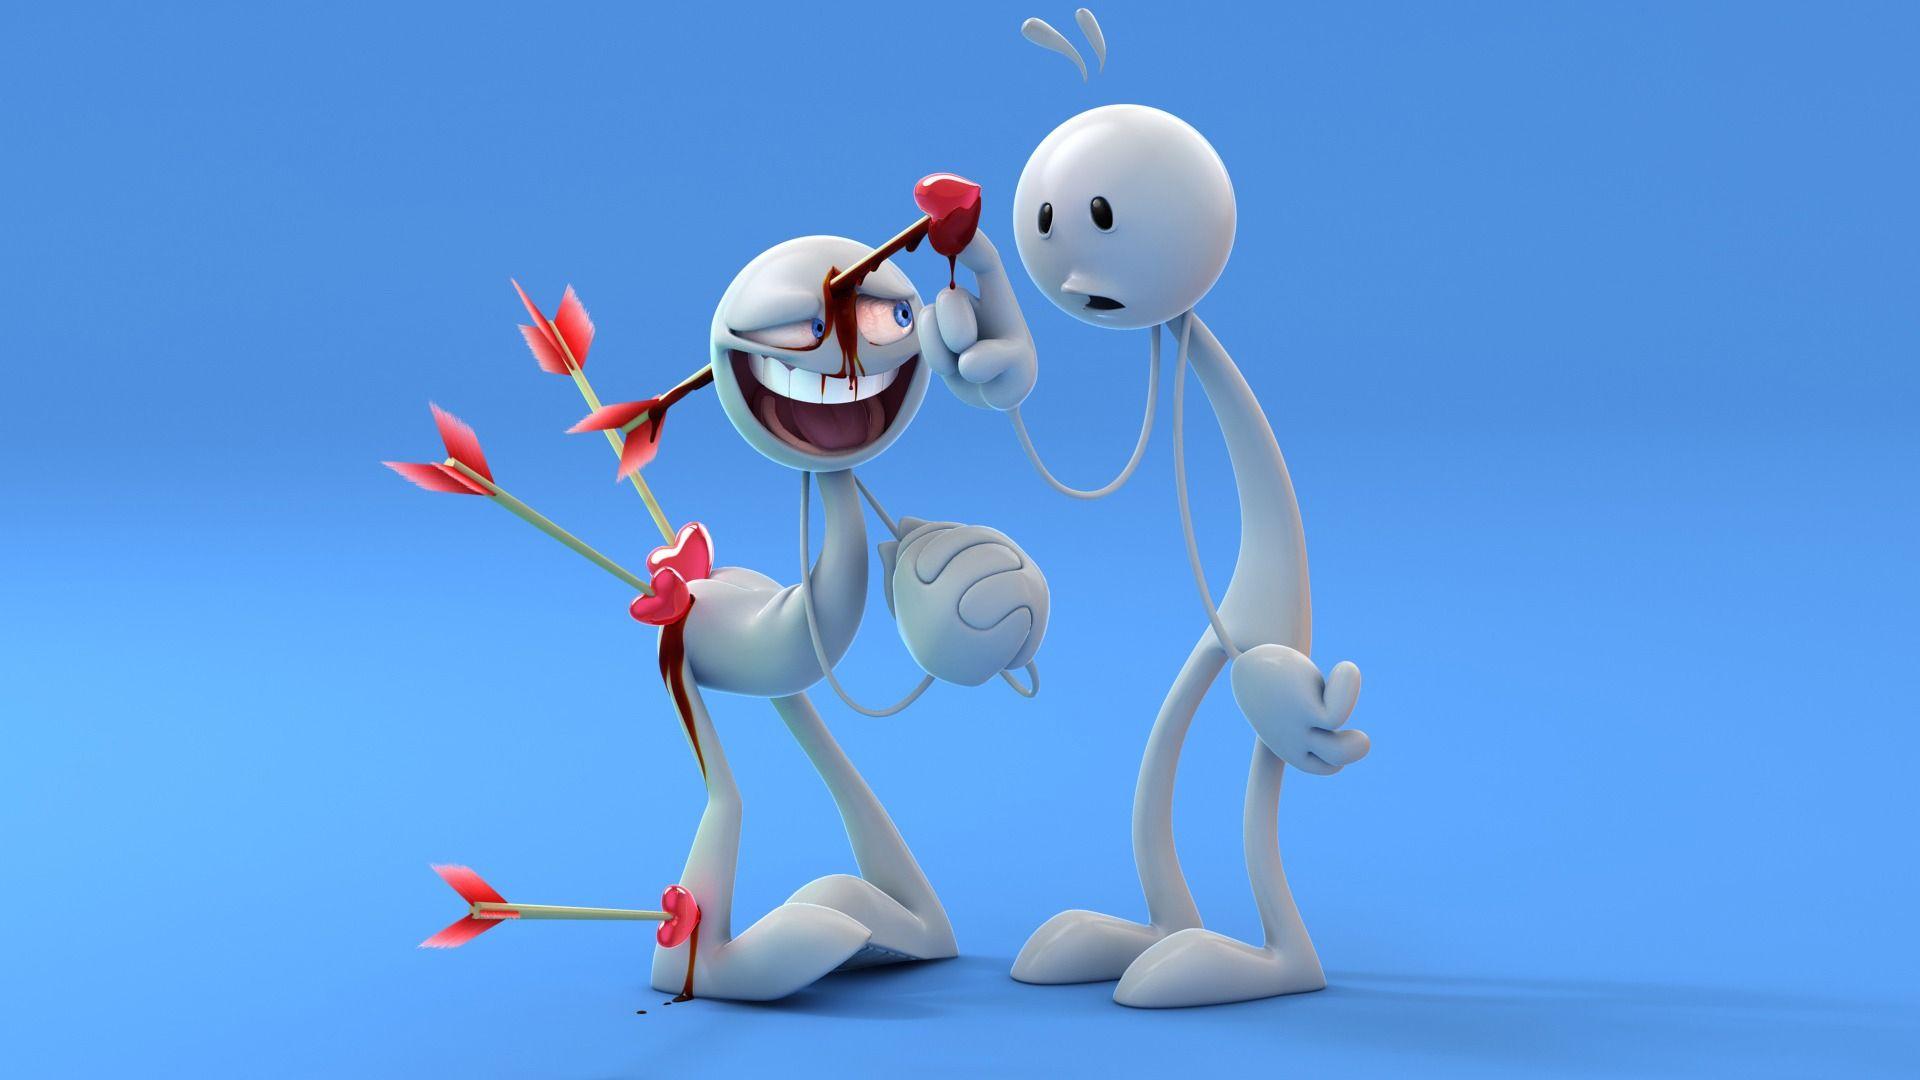 Background Funny Love Cartoon Full HD On Wallpaper 3D Of Mobile